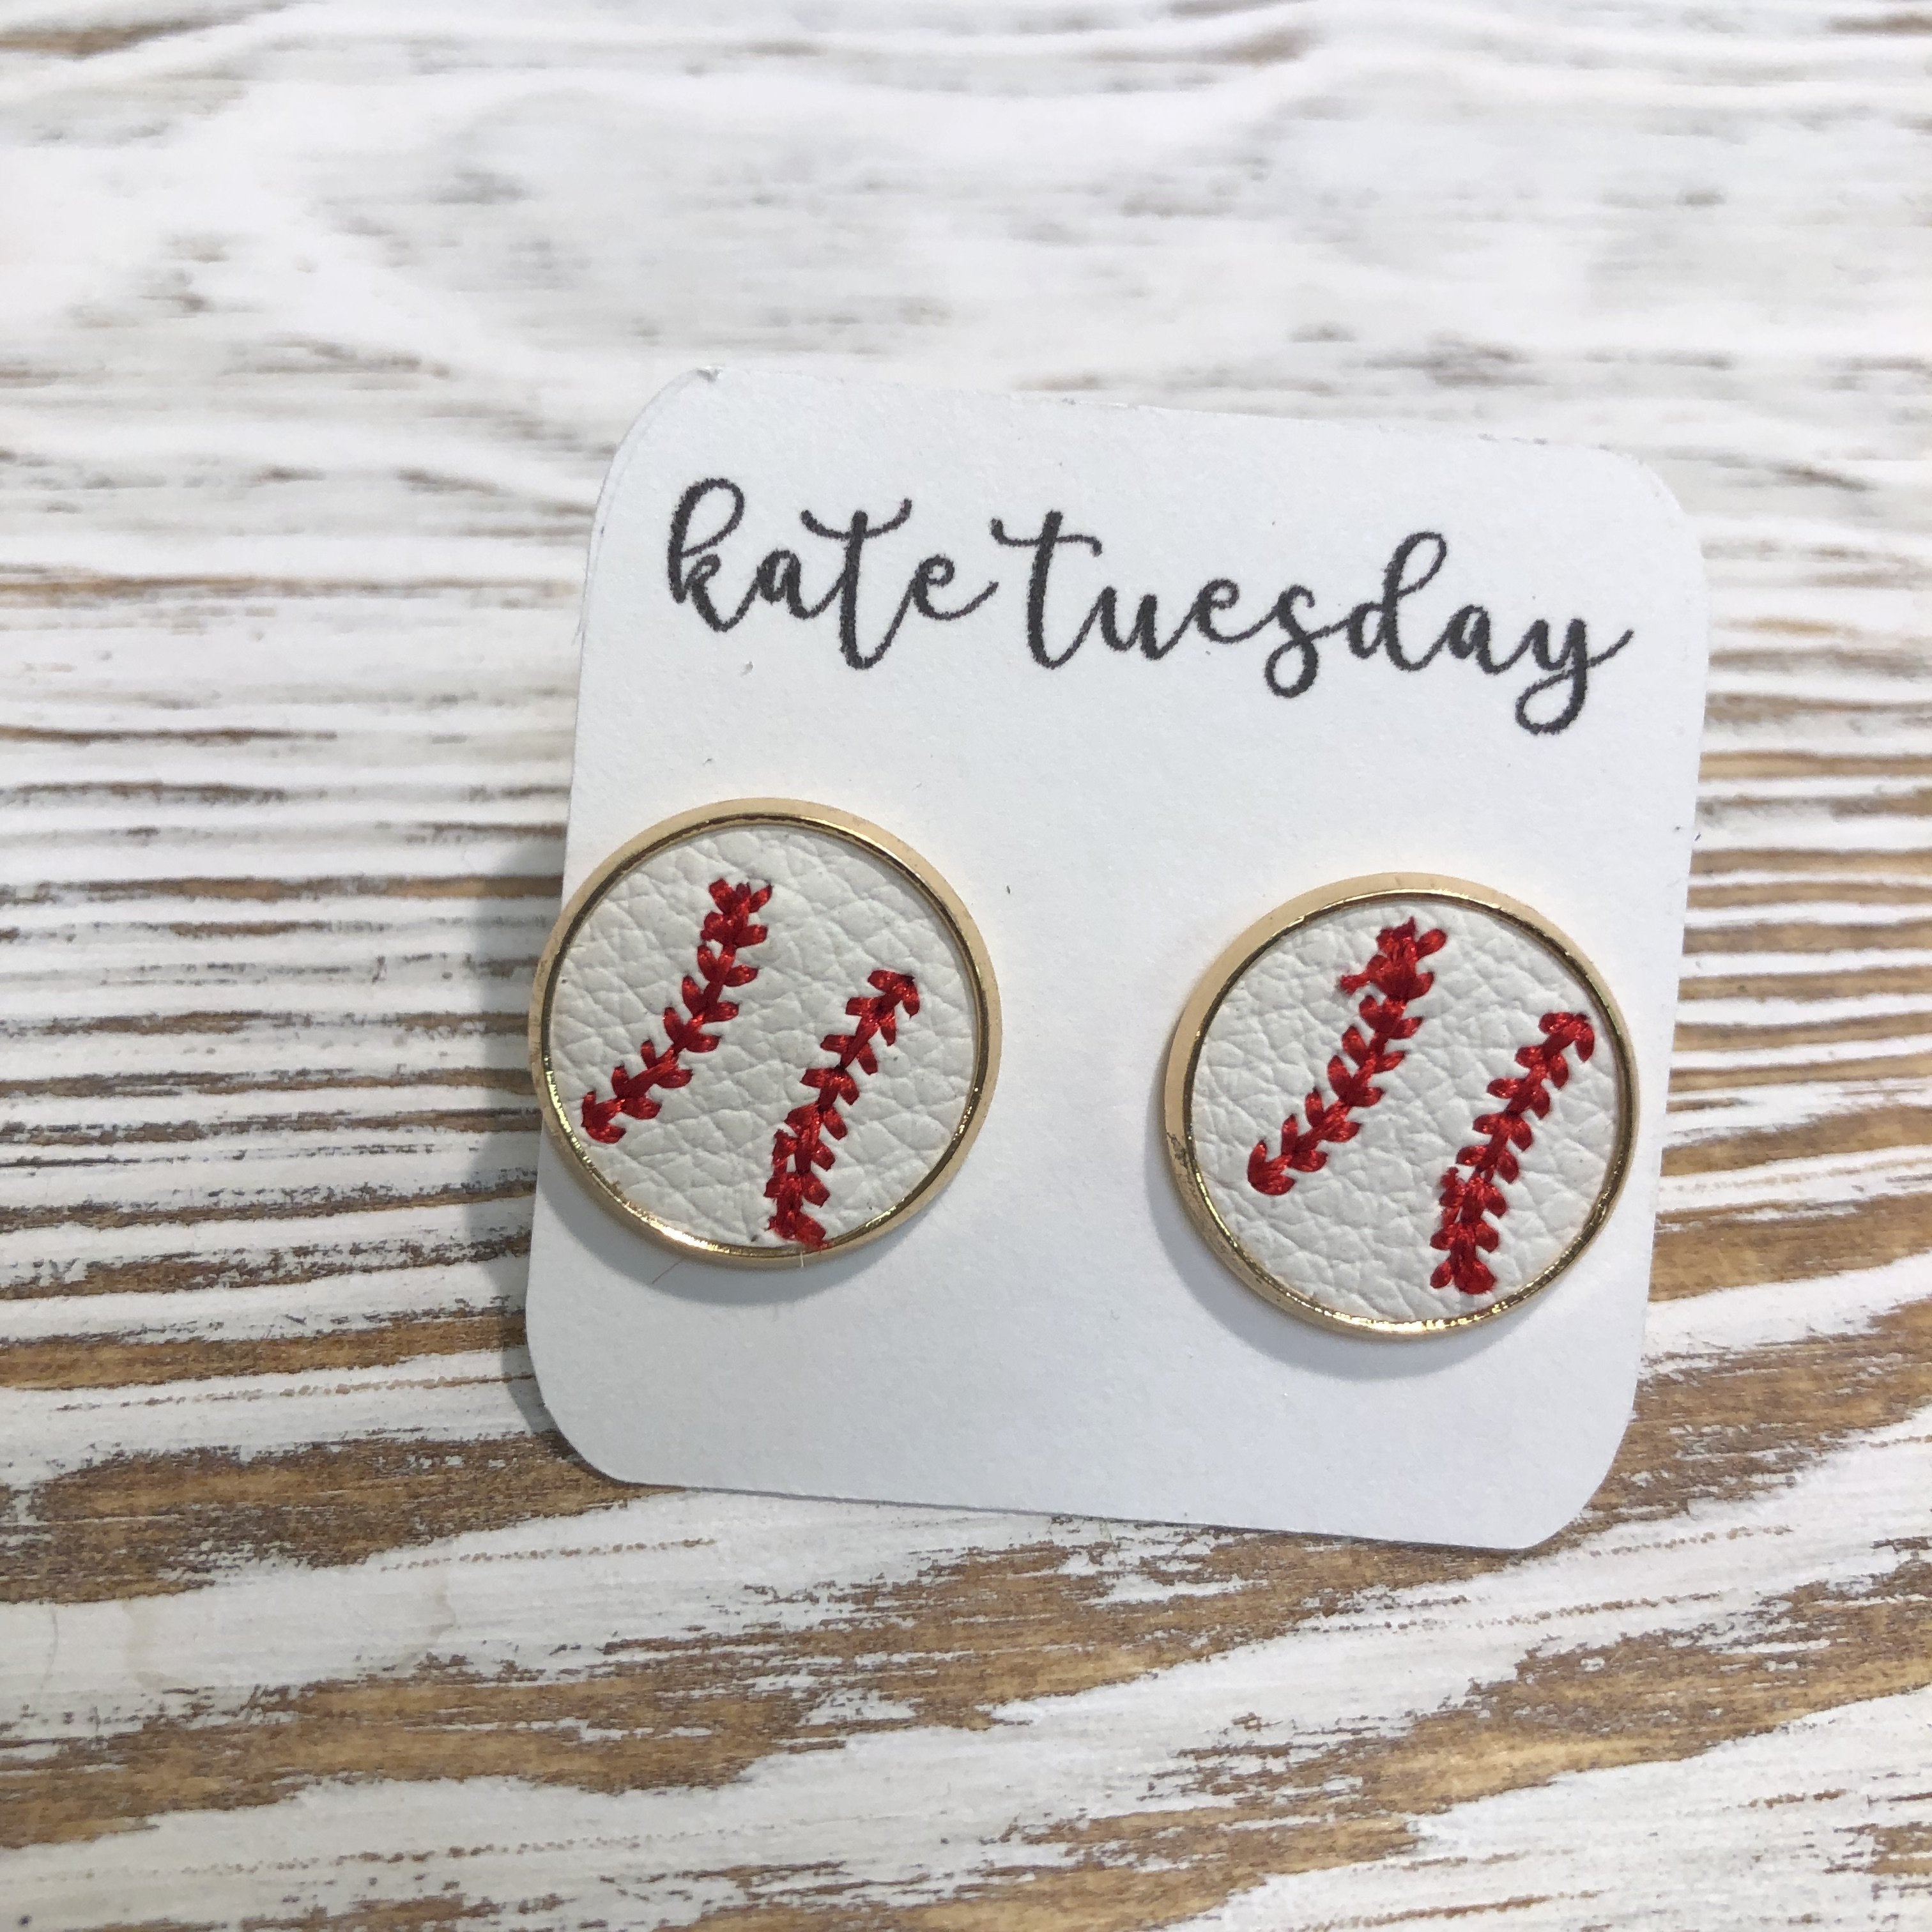 Baseball Leather Embroidered Stud Earrings 14mm